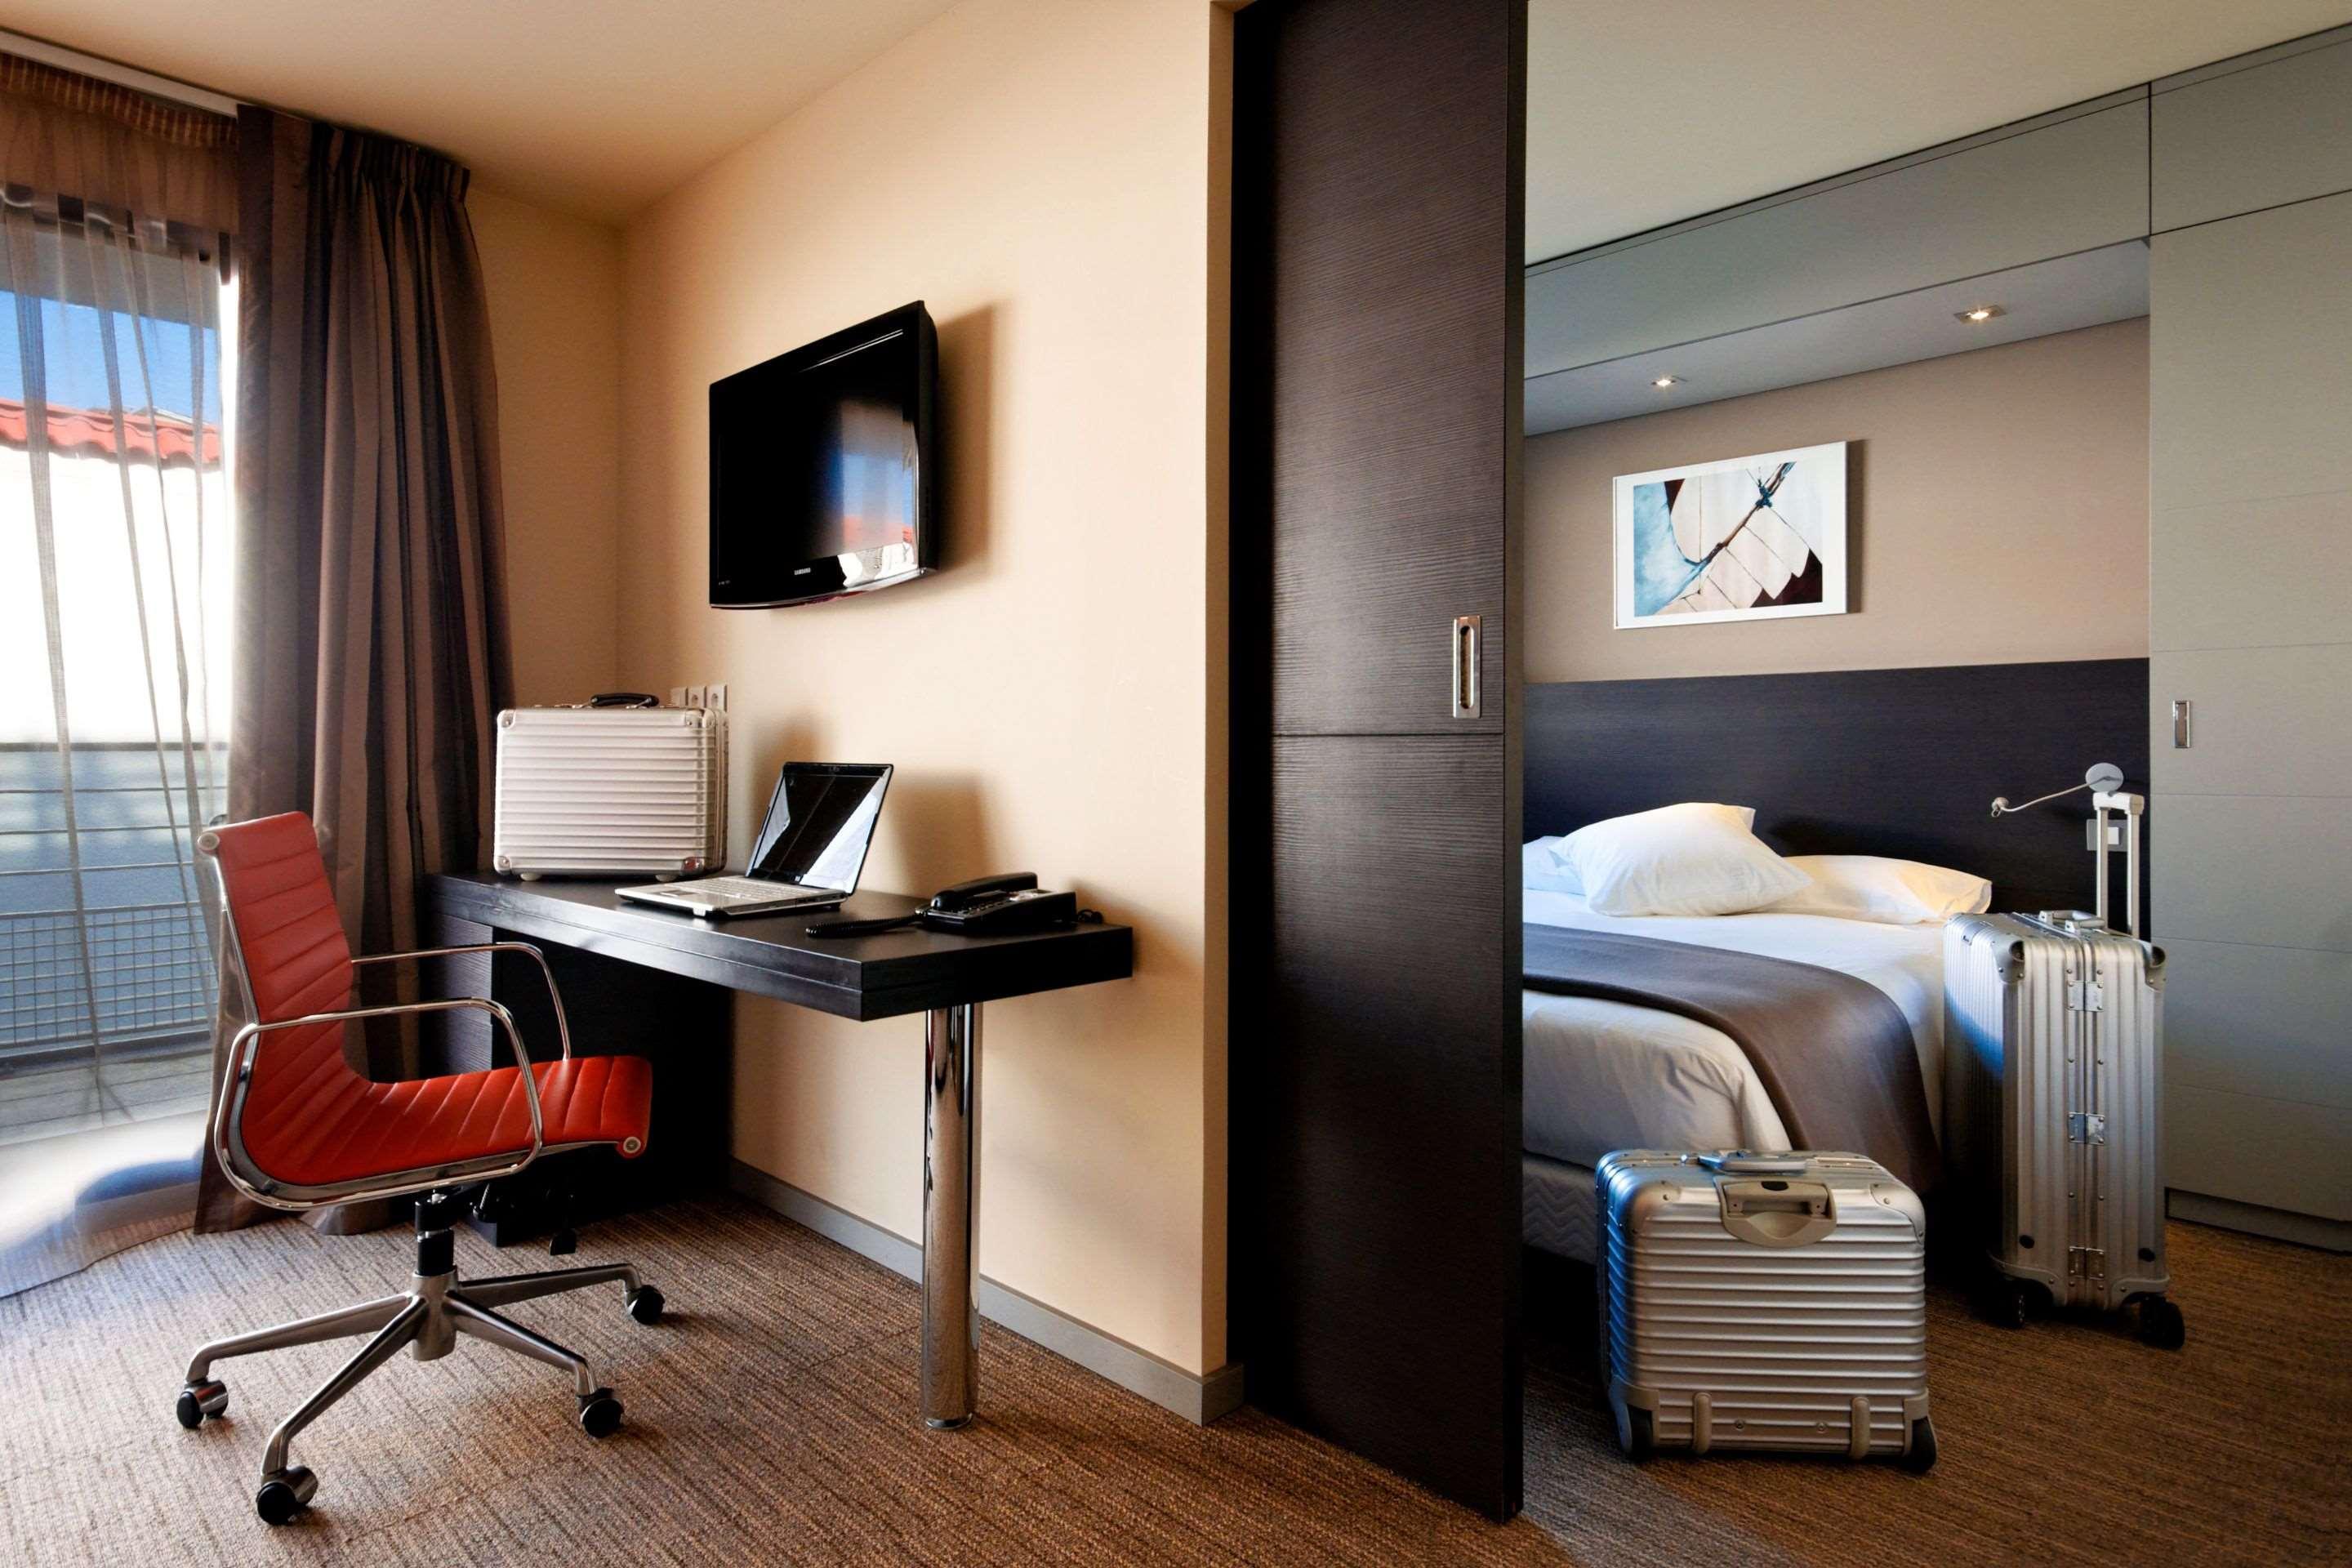 Appart Hotel Clement Ader Toulouse Bilik gambar